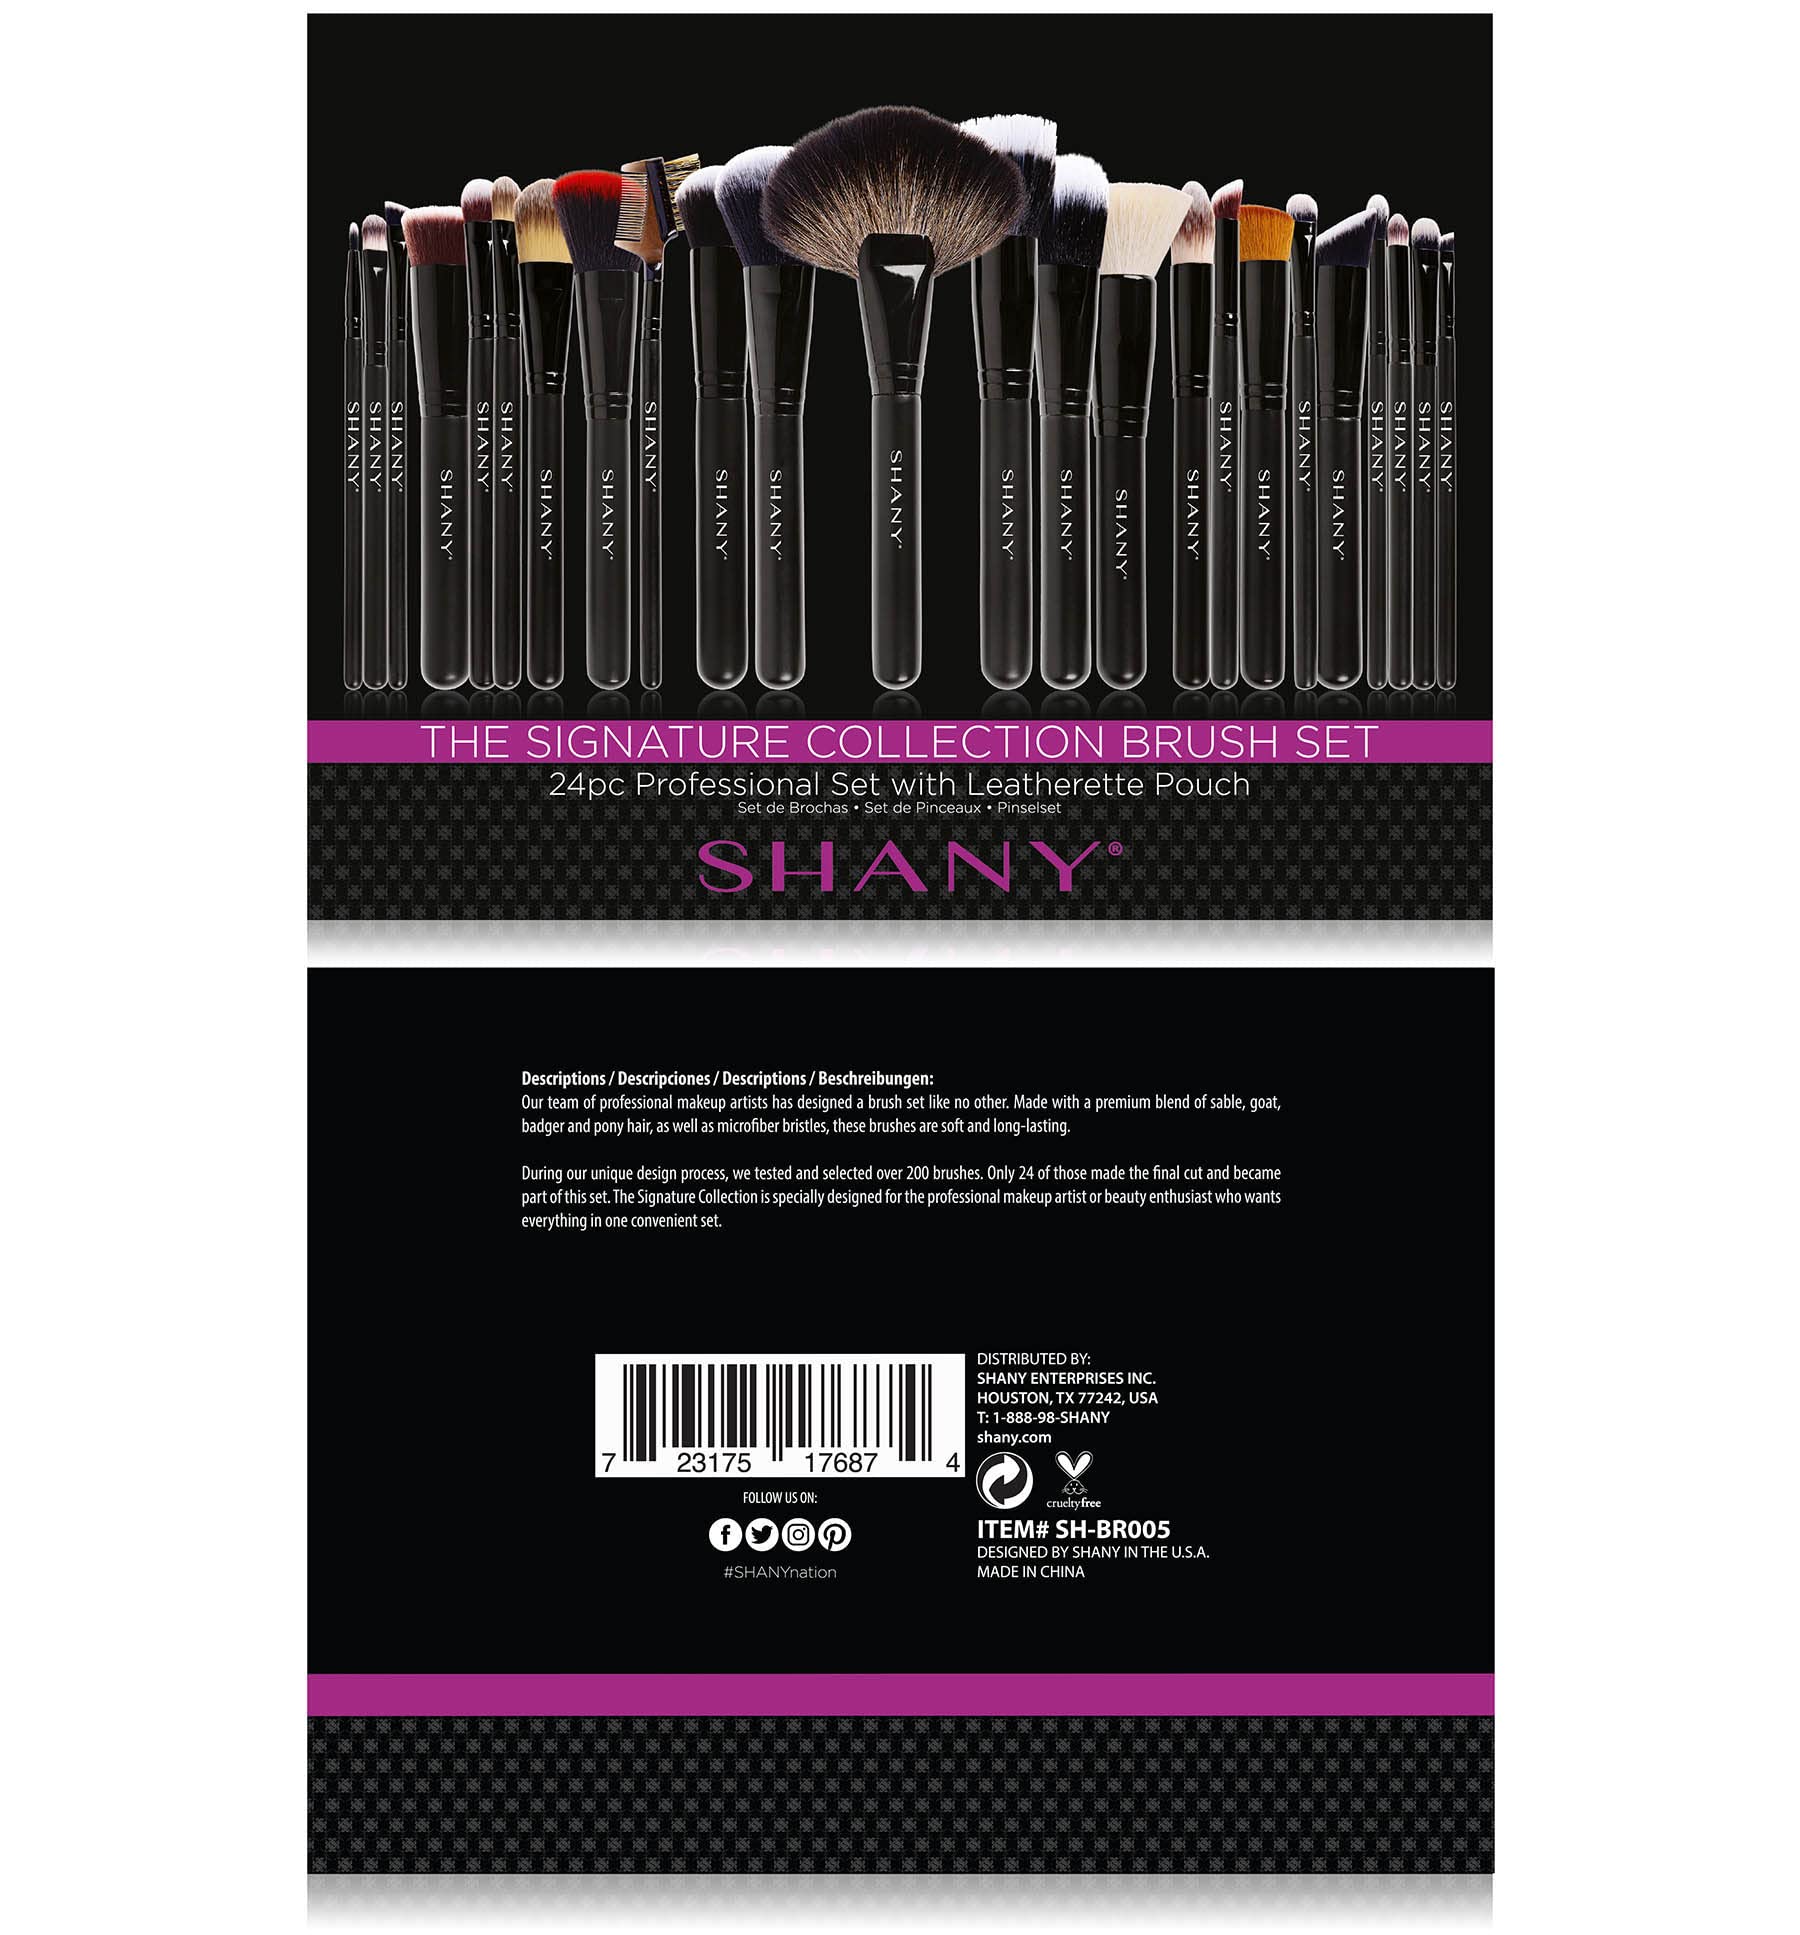 SHANY The Masterpiece Pro Signature Brush Set - 24pcs Handmade Natural/Synthetic Bristle with Wooden handle